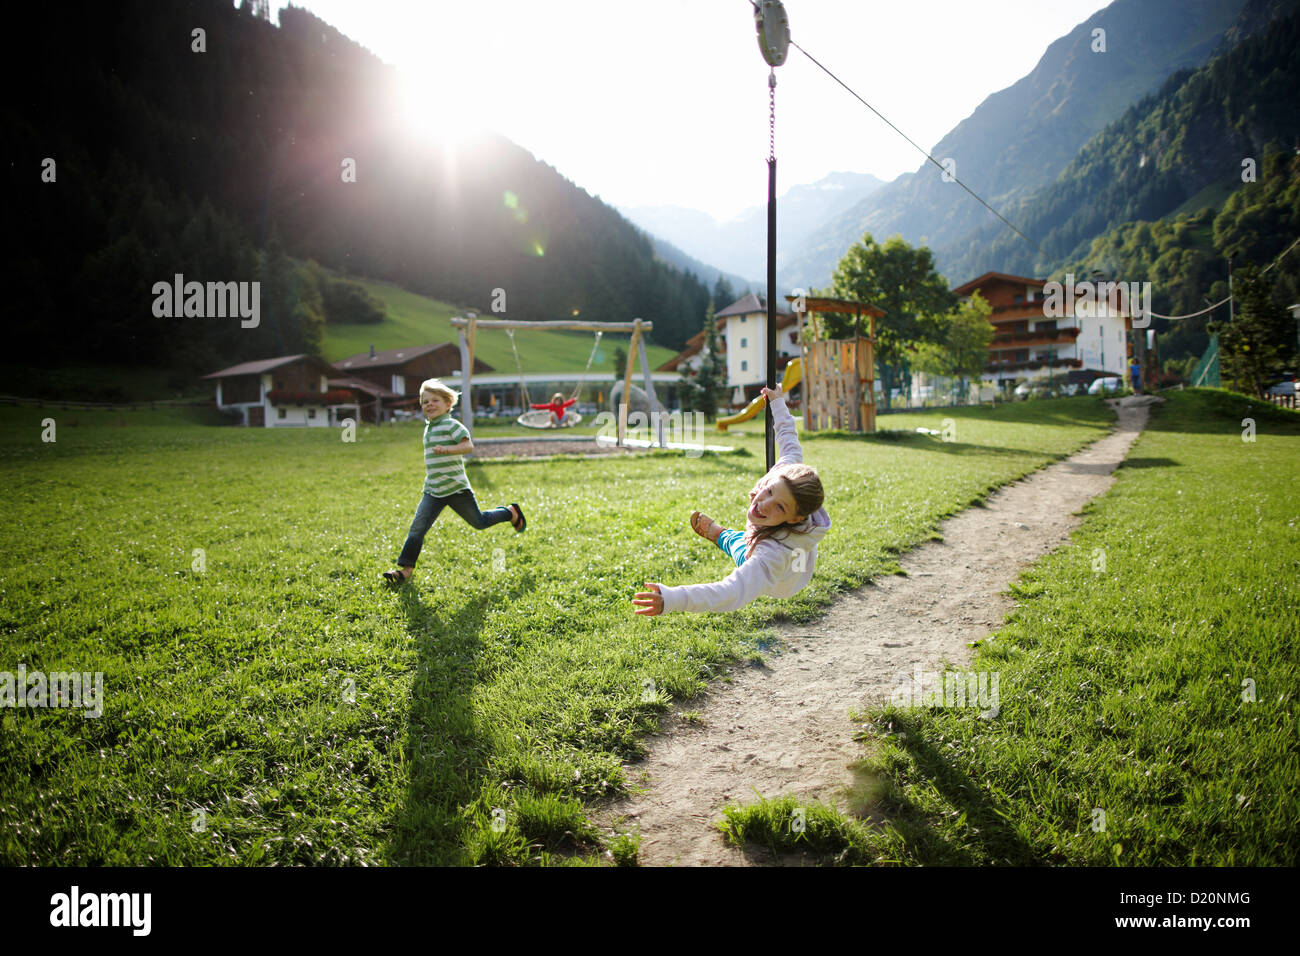 Girl playing on the zip line, outdoor area of Hotel Feuerstein, Pflersch, Gossensass, South Tyrol, Italy Stock Photo